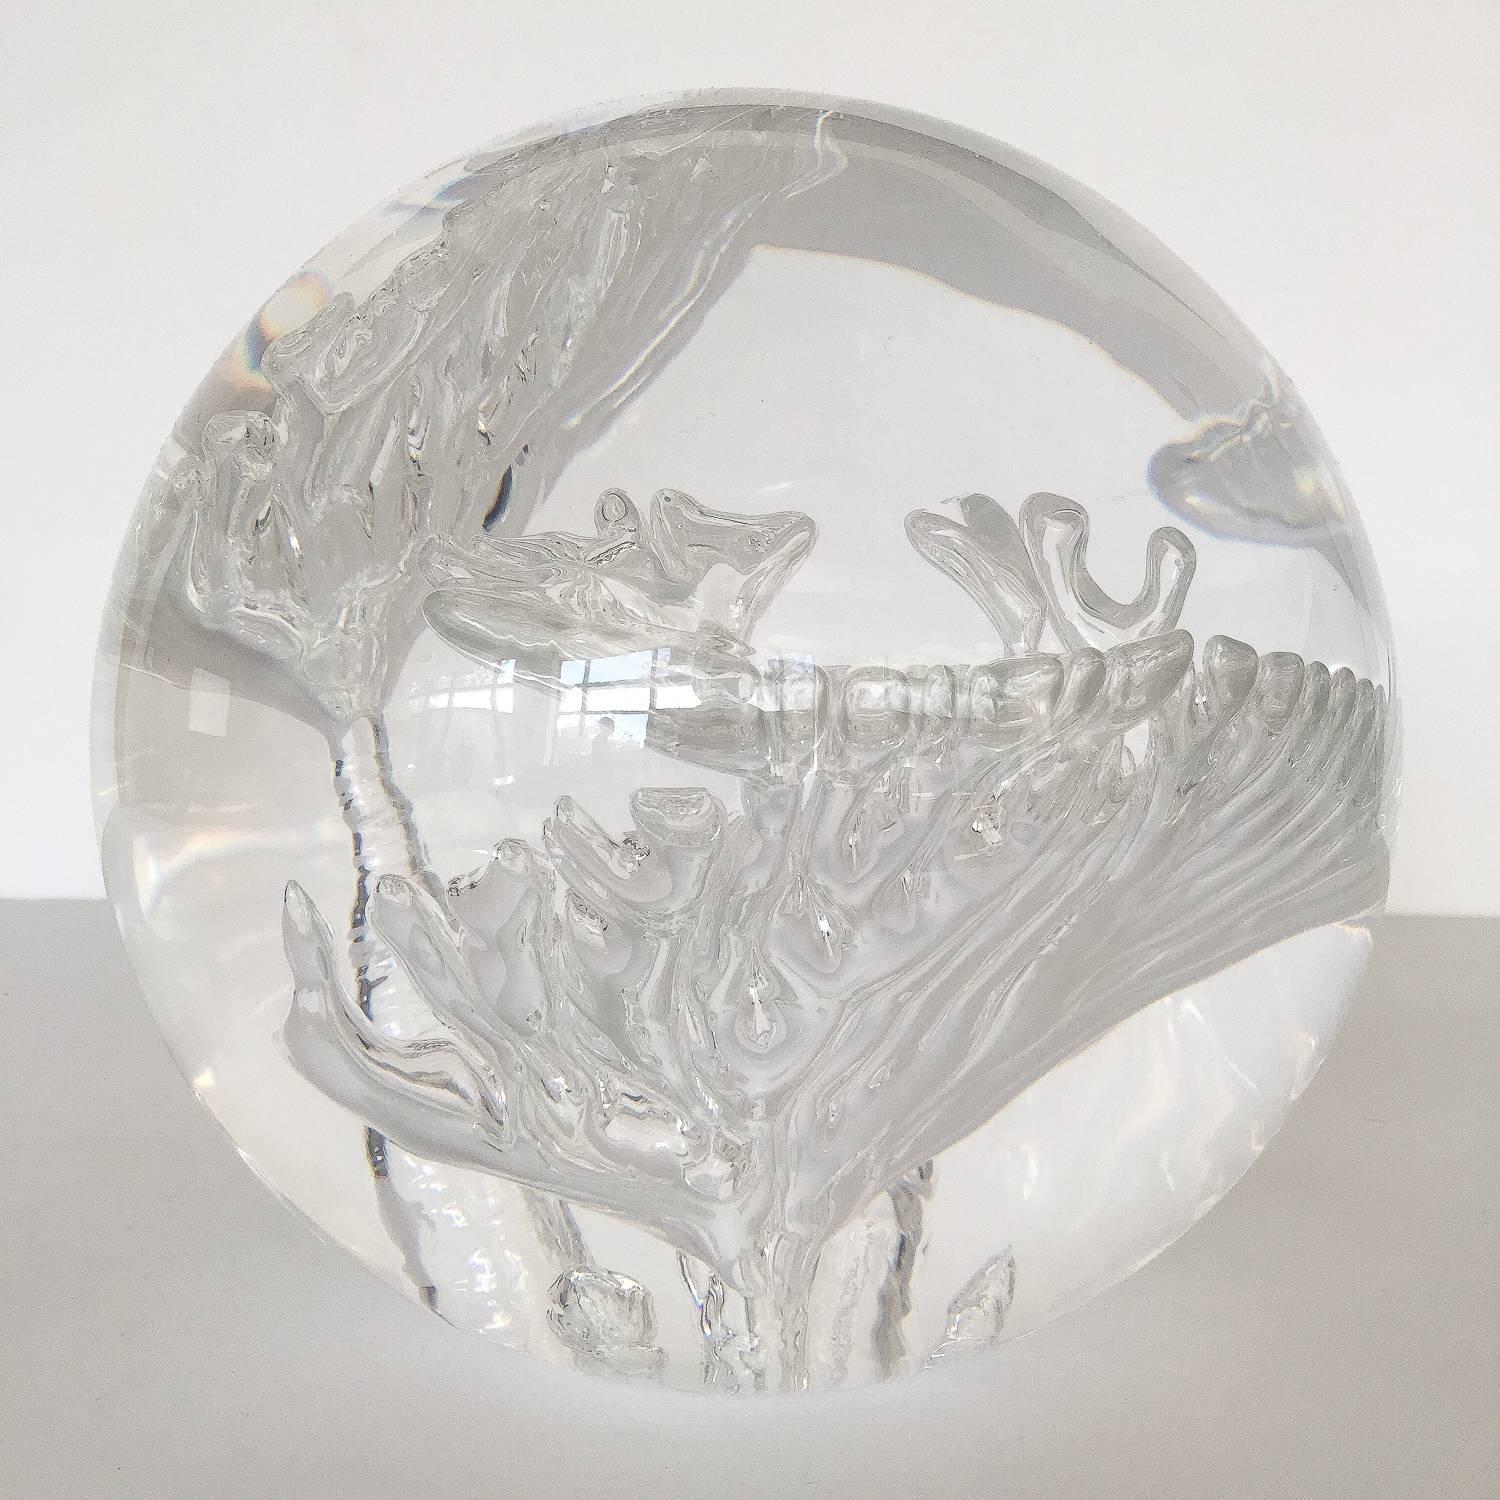 Large 12" diameter clear Lucite sphere sculpture with suspended bubble inclusions. 5" diameter flat bottom. Striking from all angles!